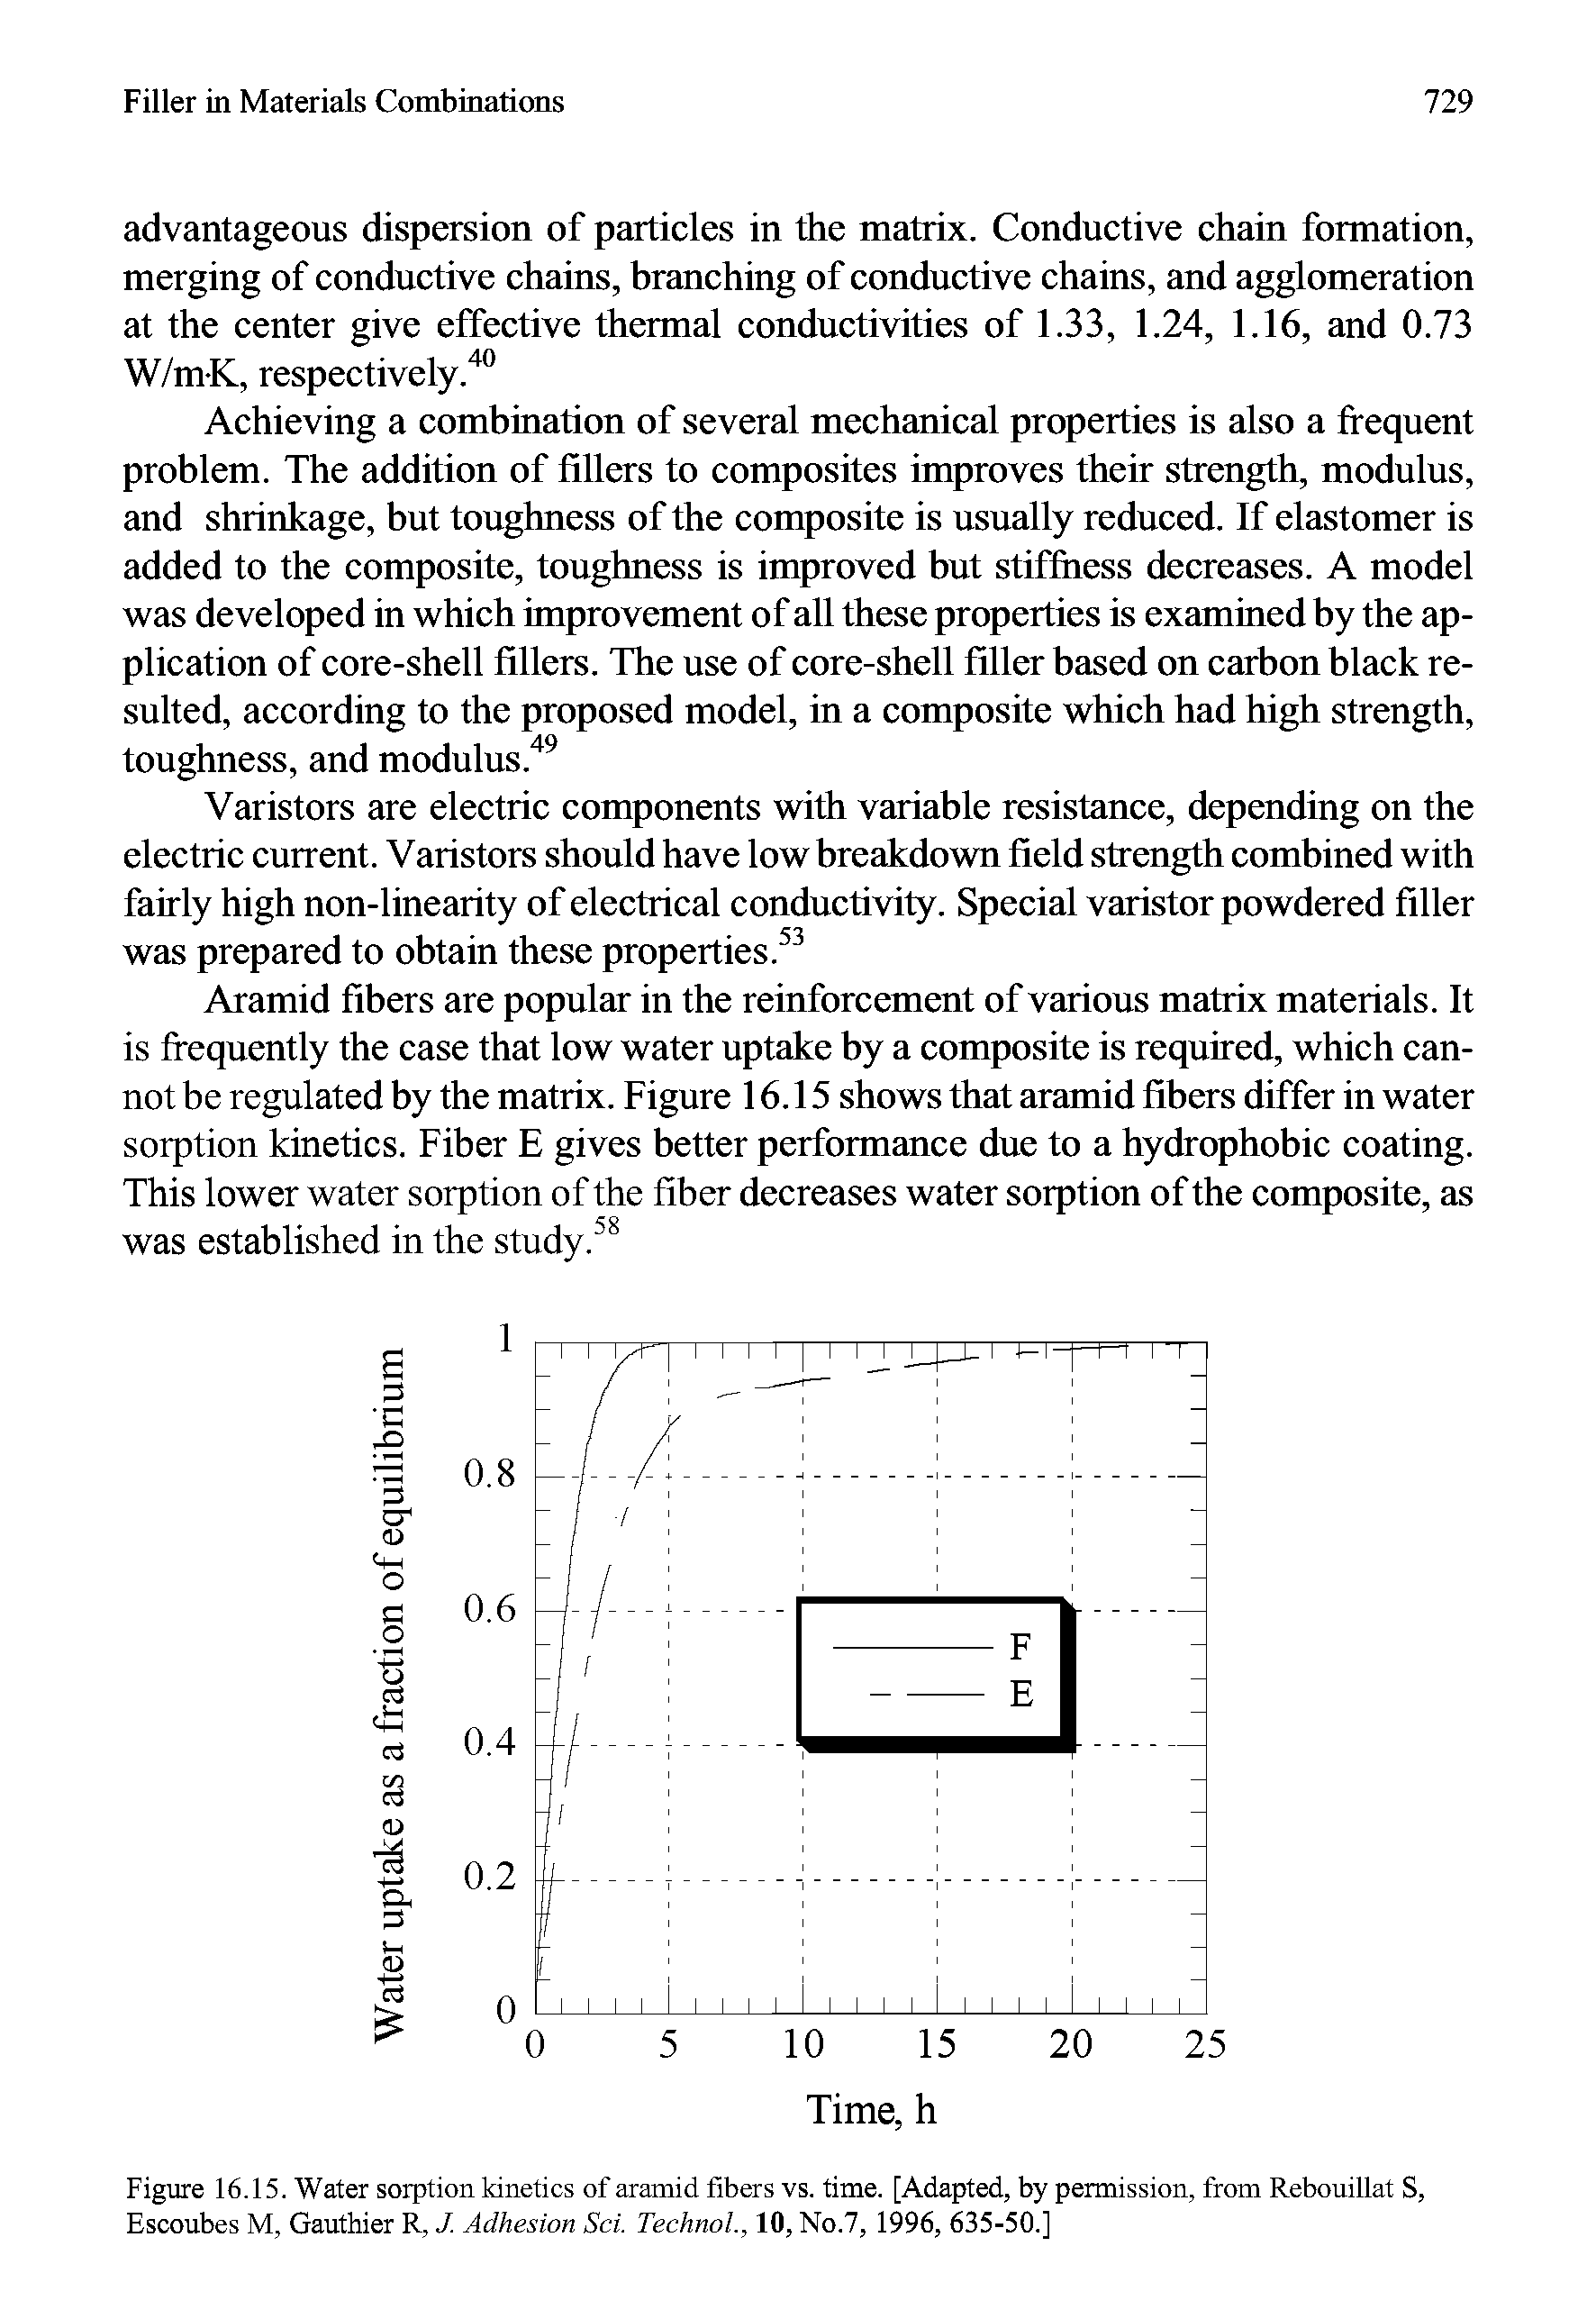 Figure 16.15. Water sorption kinetics of aramid fibers vs. time. [Adapted, by permission, from Rebouillat S, Escoubes M, Gauthier R, J. Adhesion Sci. Technol., 10, No.7, 1996, 635-50.]...